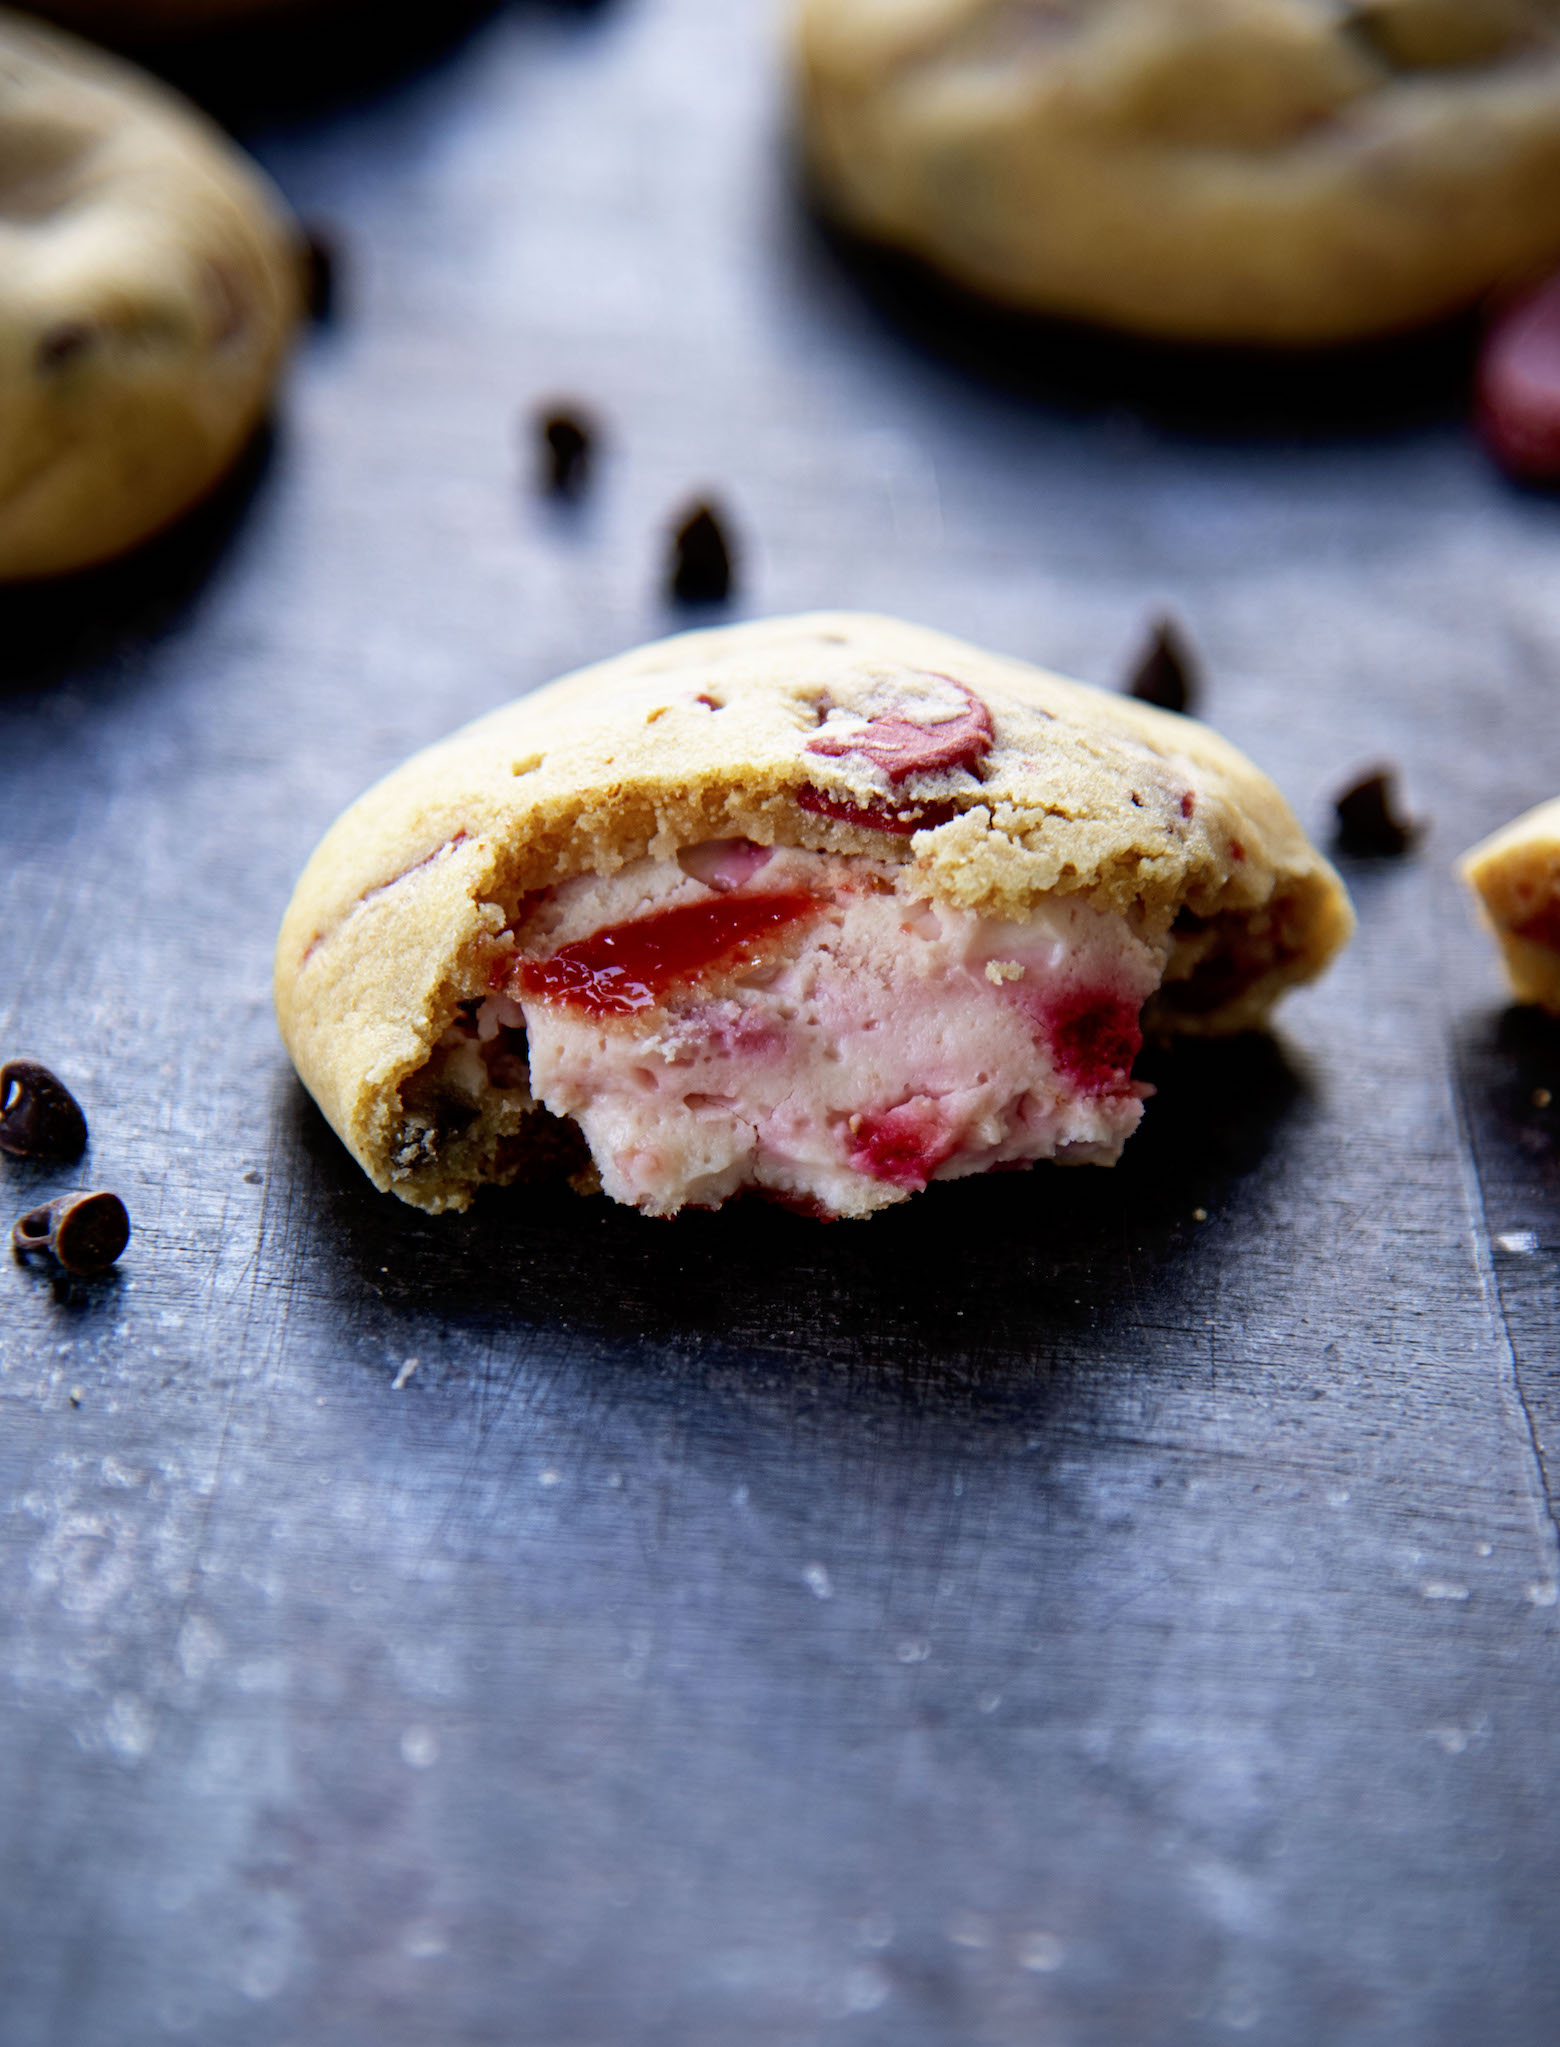 Half a cookie with strawberry cheesecake filling exposed.